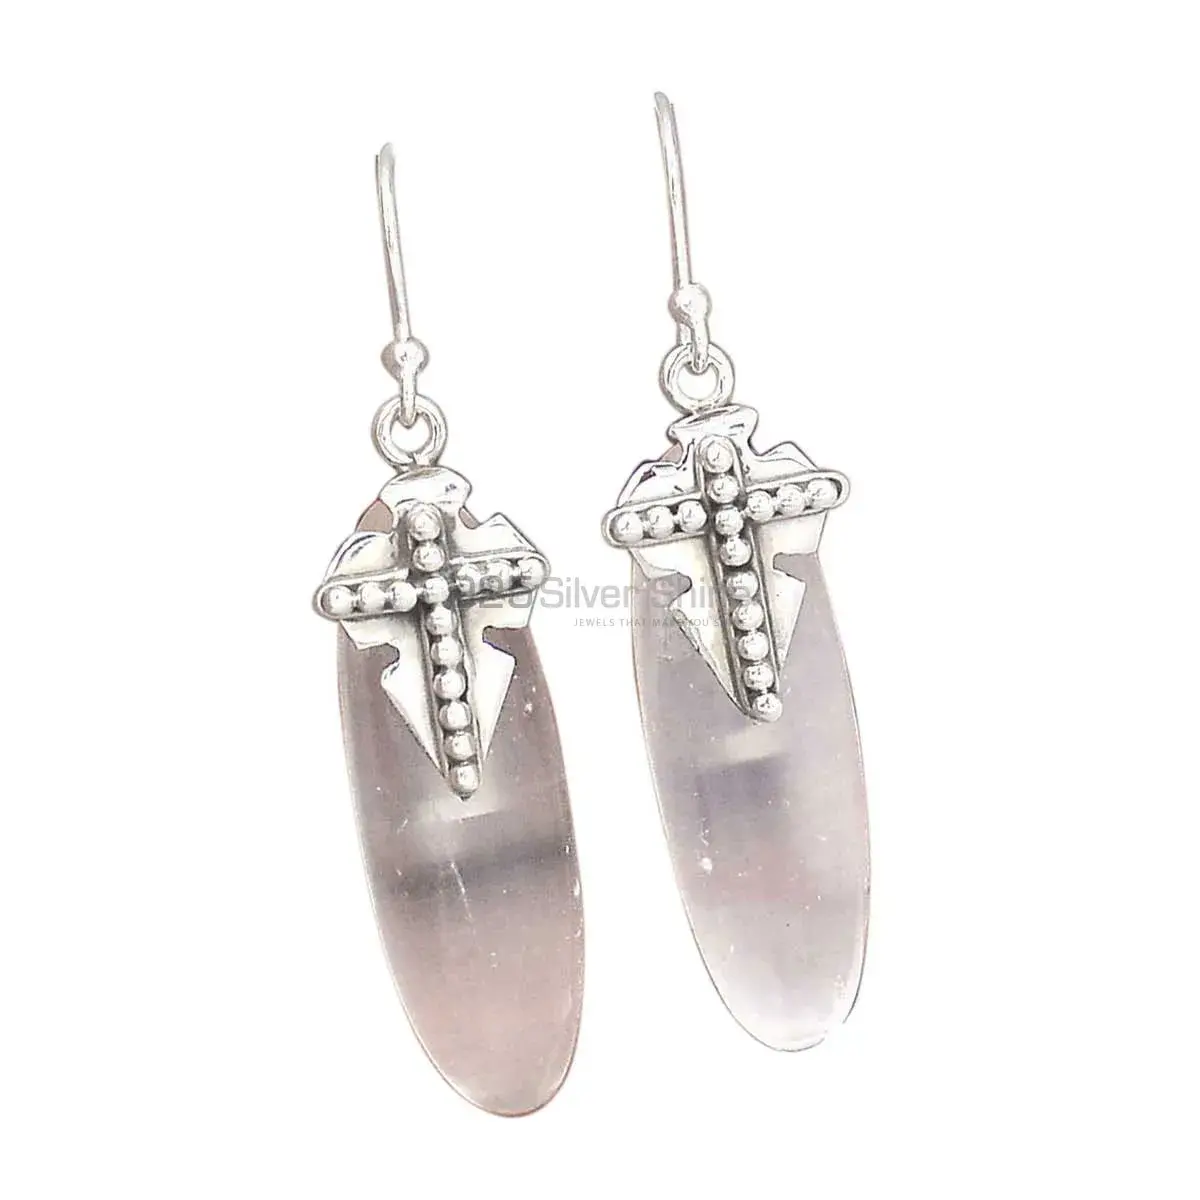 Natural Rose Quartz Gemstone Earrings Manufacturer In 925 Sterling Silver Jewelry 925SE2609